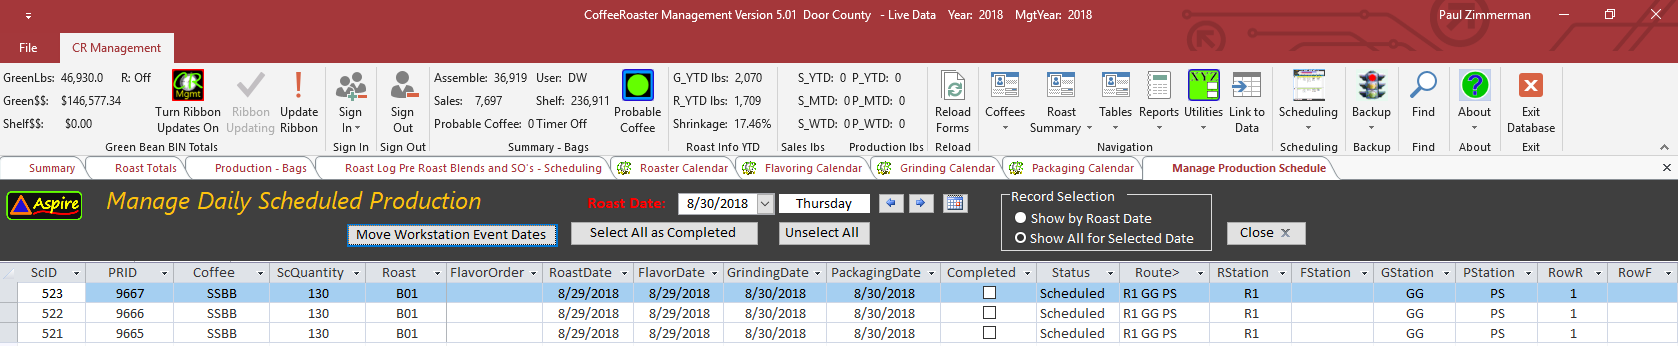 CoffeeRoaster Scheduling Manage Daily Production Results 